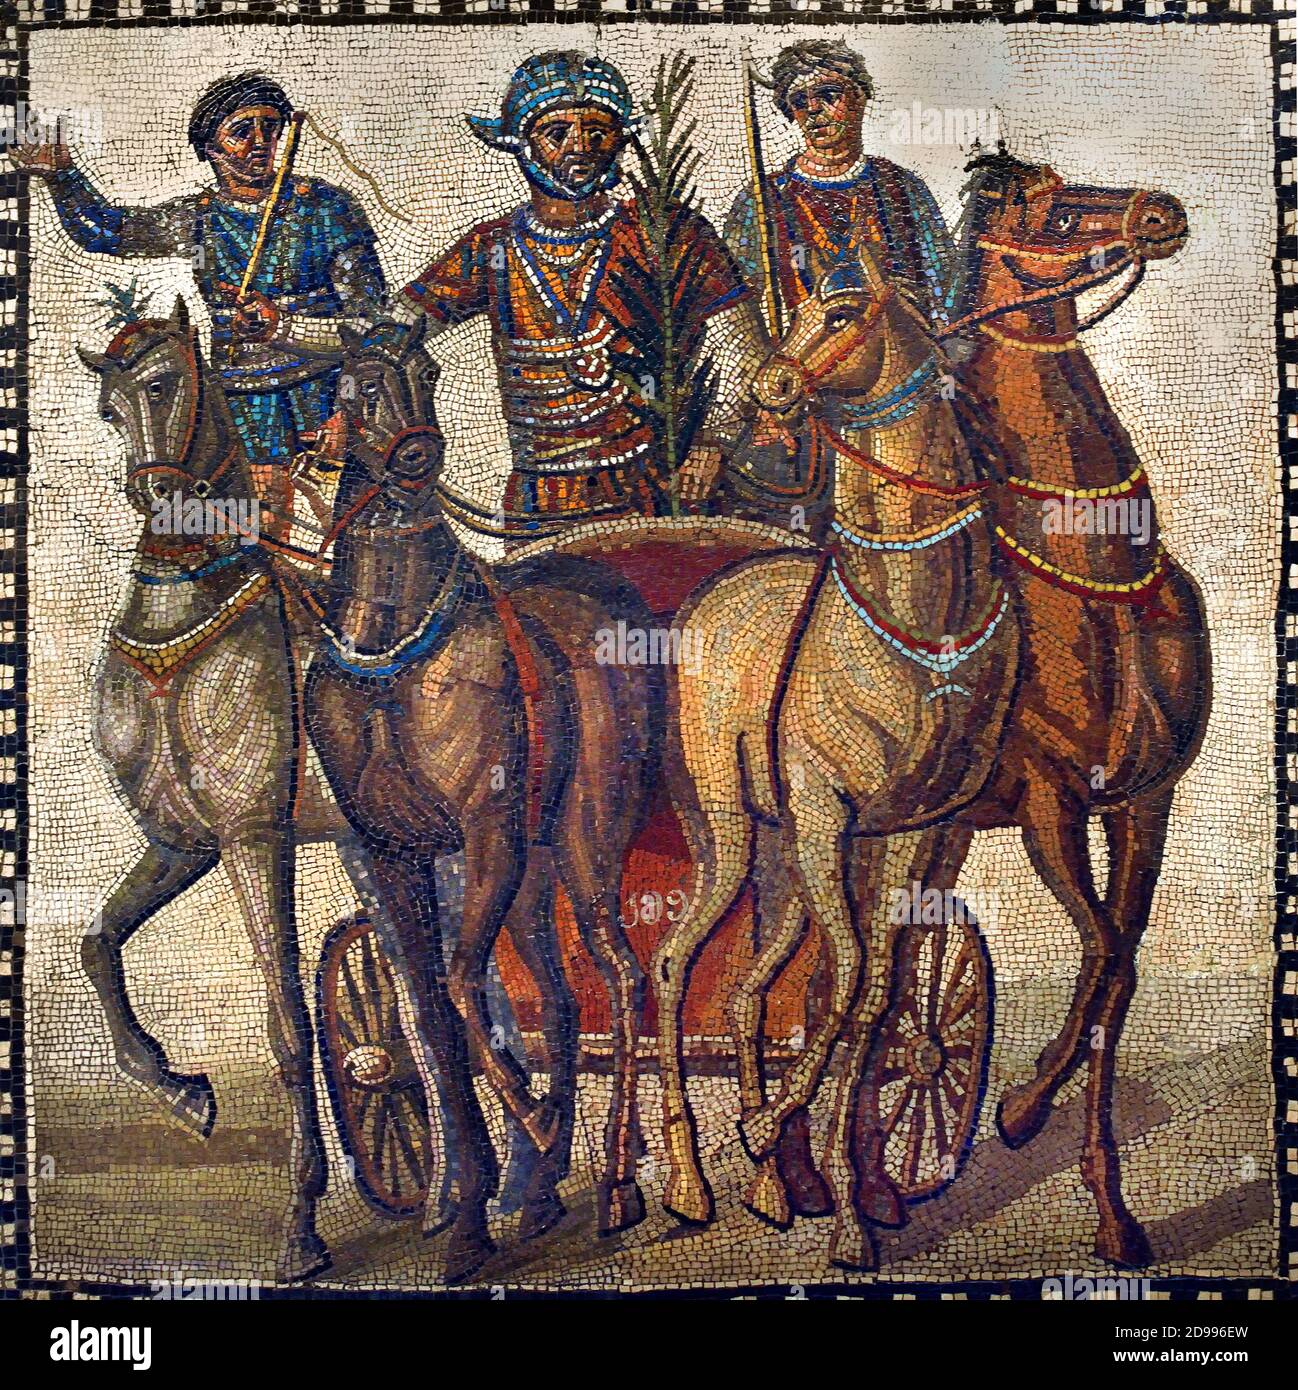 Mosaic depicting a quadriga of the factio russata (‘the reds,’ representing the summer), 3rd century AD, from Rome,  The red team's driver, winner of the race, has taken the palm frond of victory. Madrid, National Archaeological Museum, Spanish Spain, ( A quadriga is a car or chariot drawn by four horses  ) Stock Photo